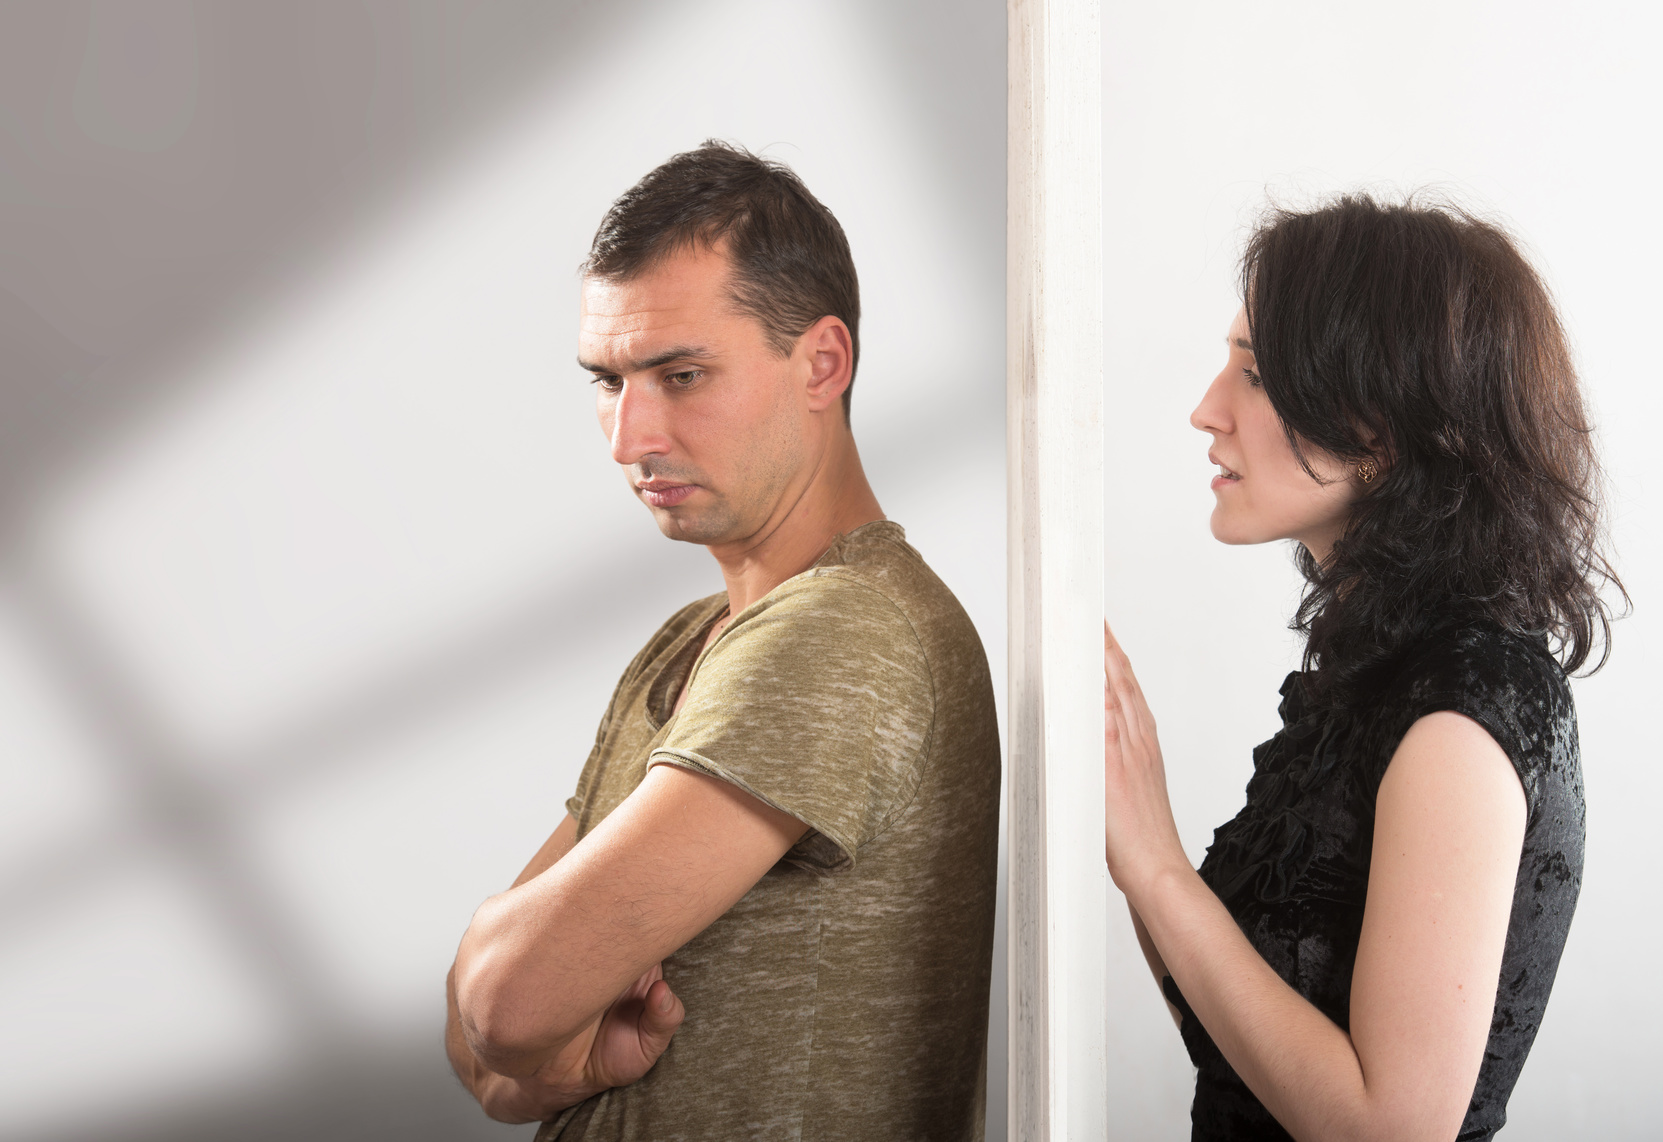 Conflict between man and woman standing on either side of a door